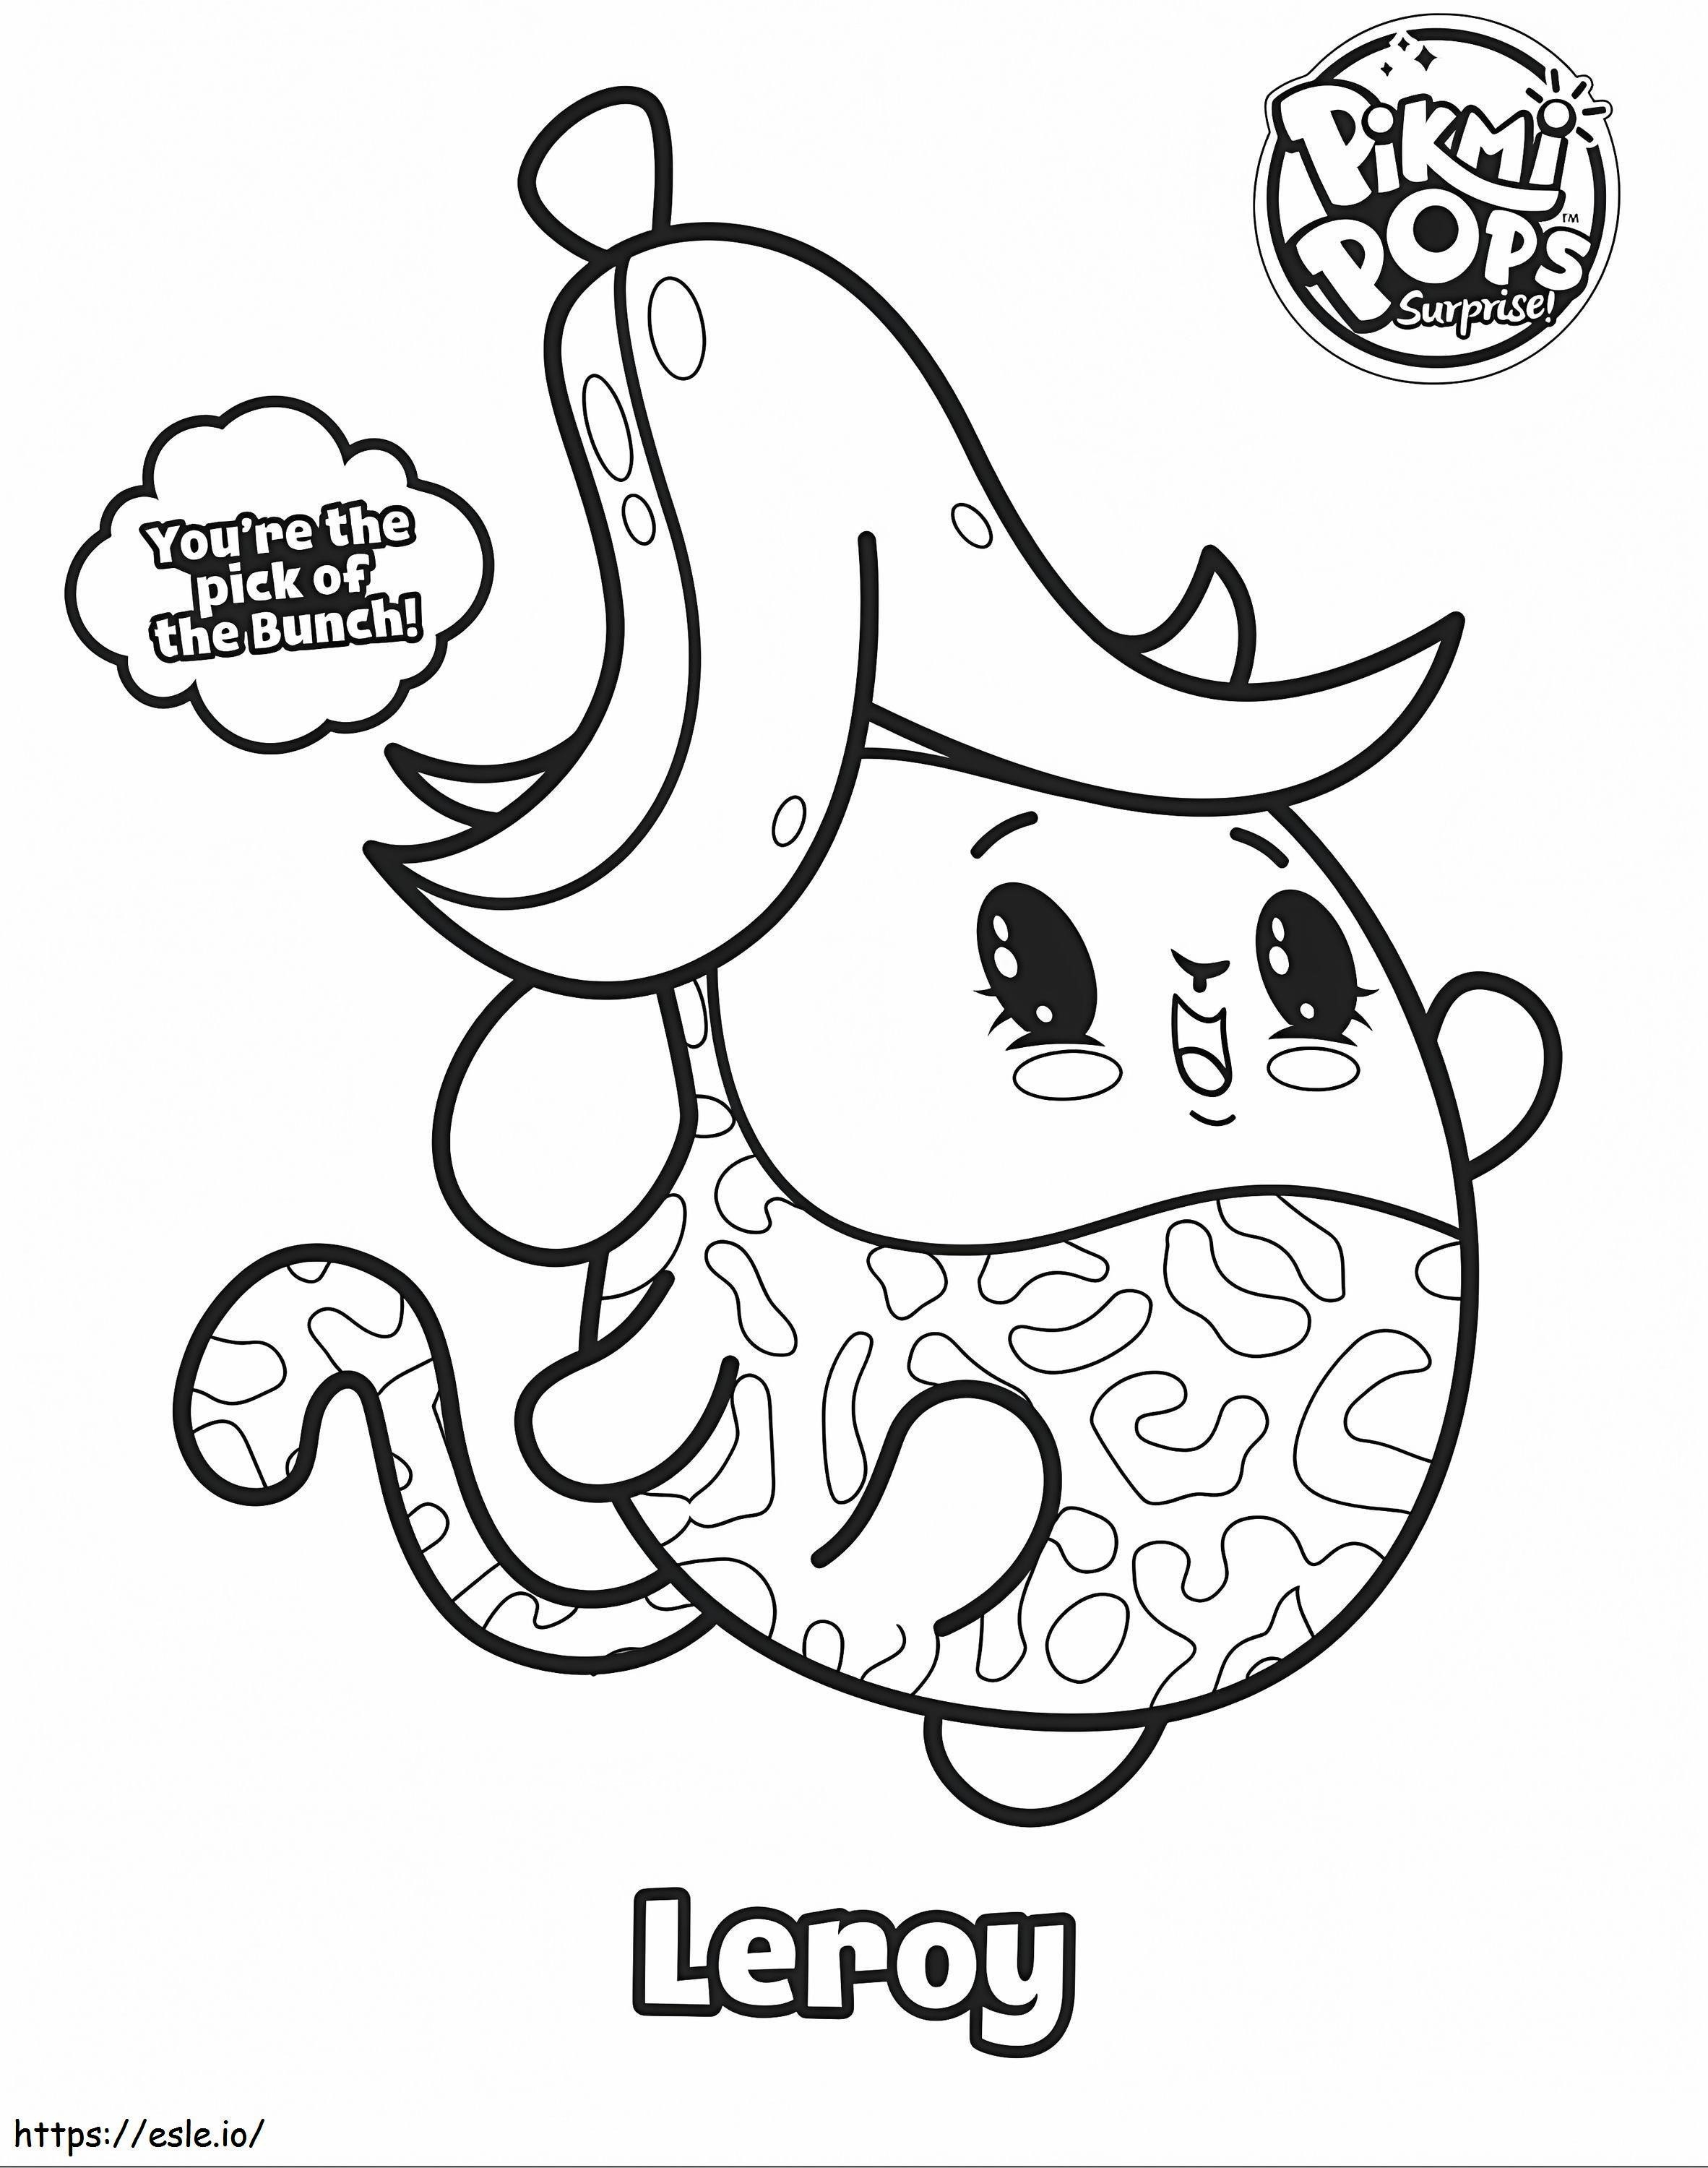 1596068310 Pps1 Colouringsheet Leroy coloring page